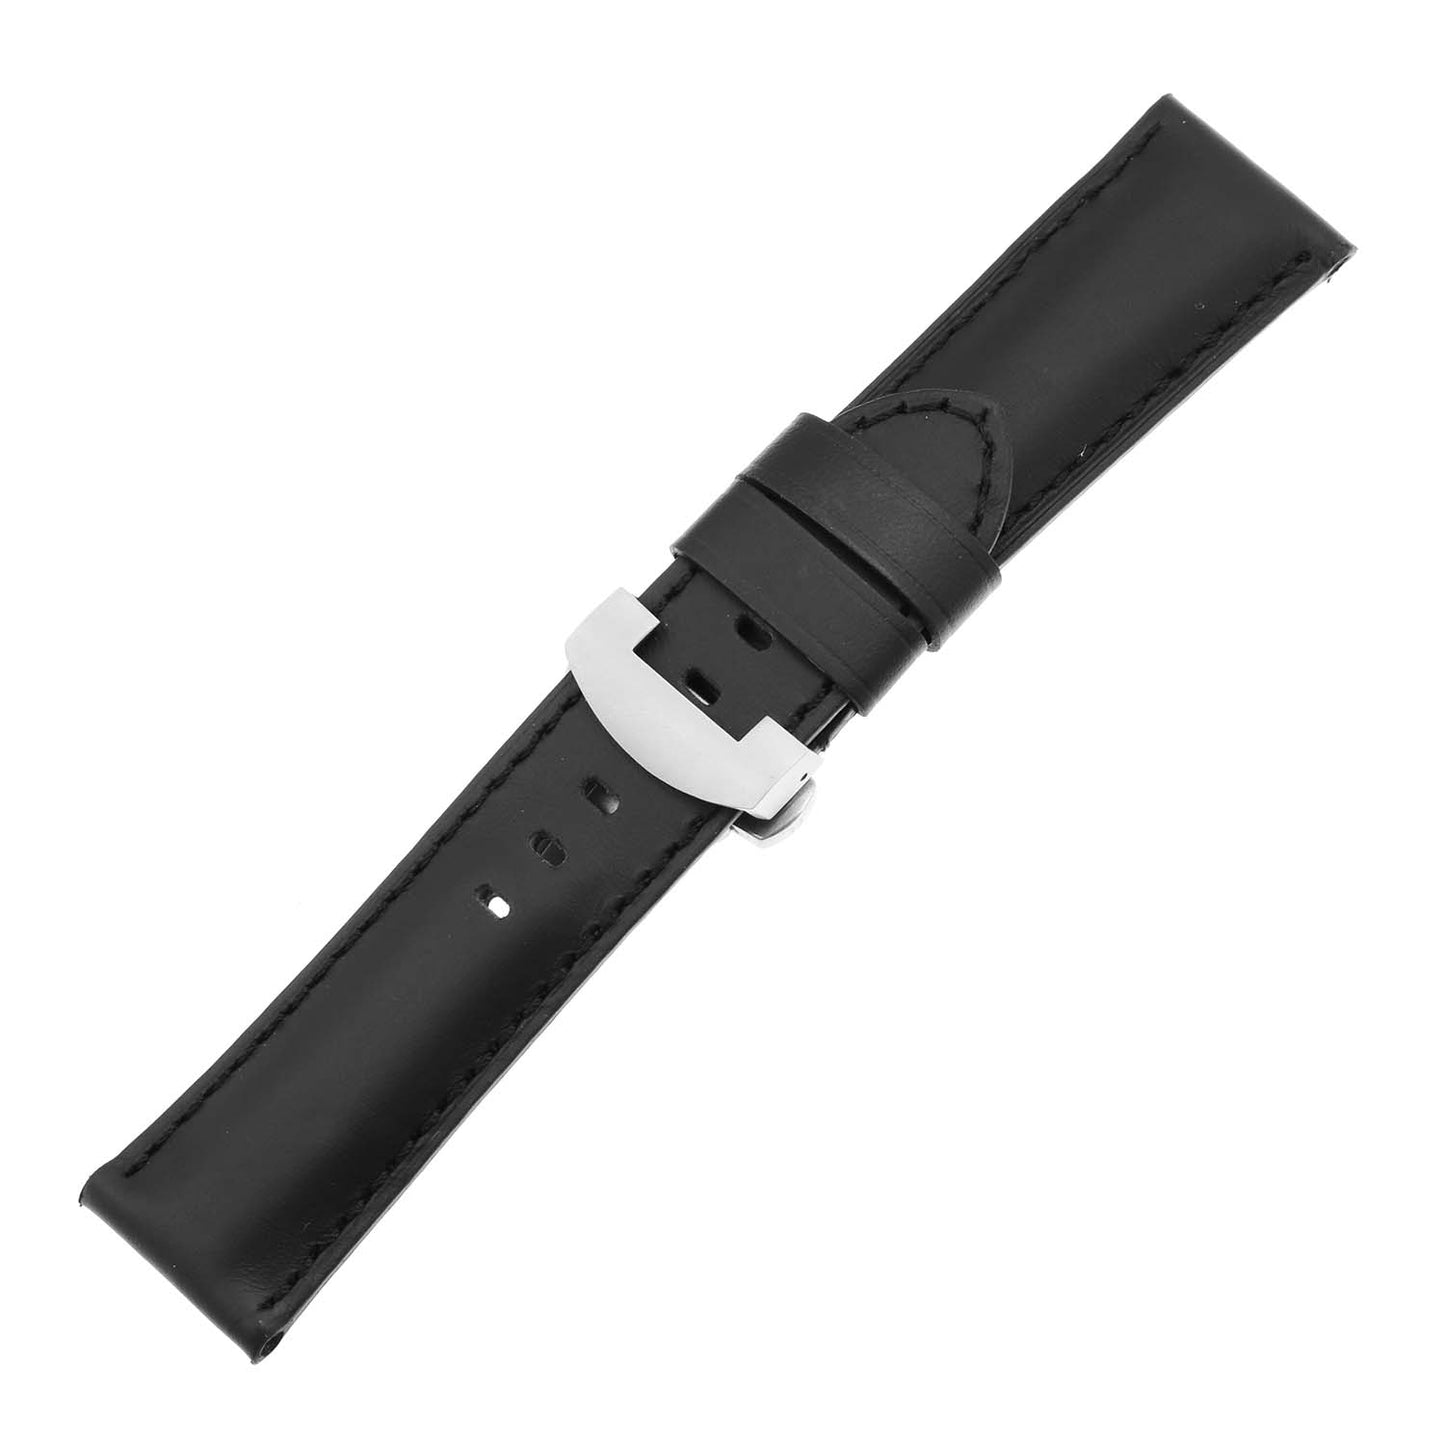 DASSARI Smooth Leather Strap w/ Deployant Clasp (Standard, Long) for OnePlus Watch